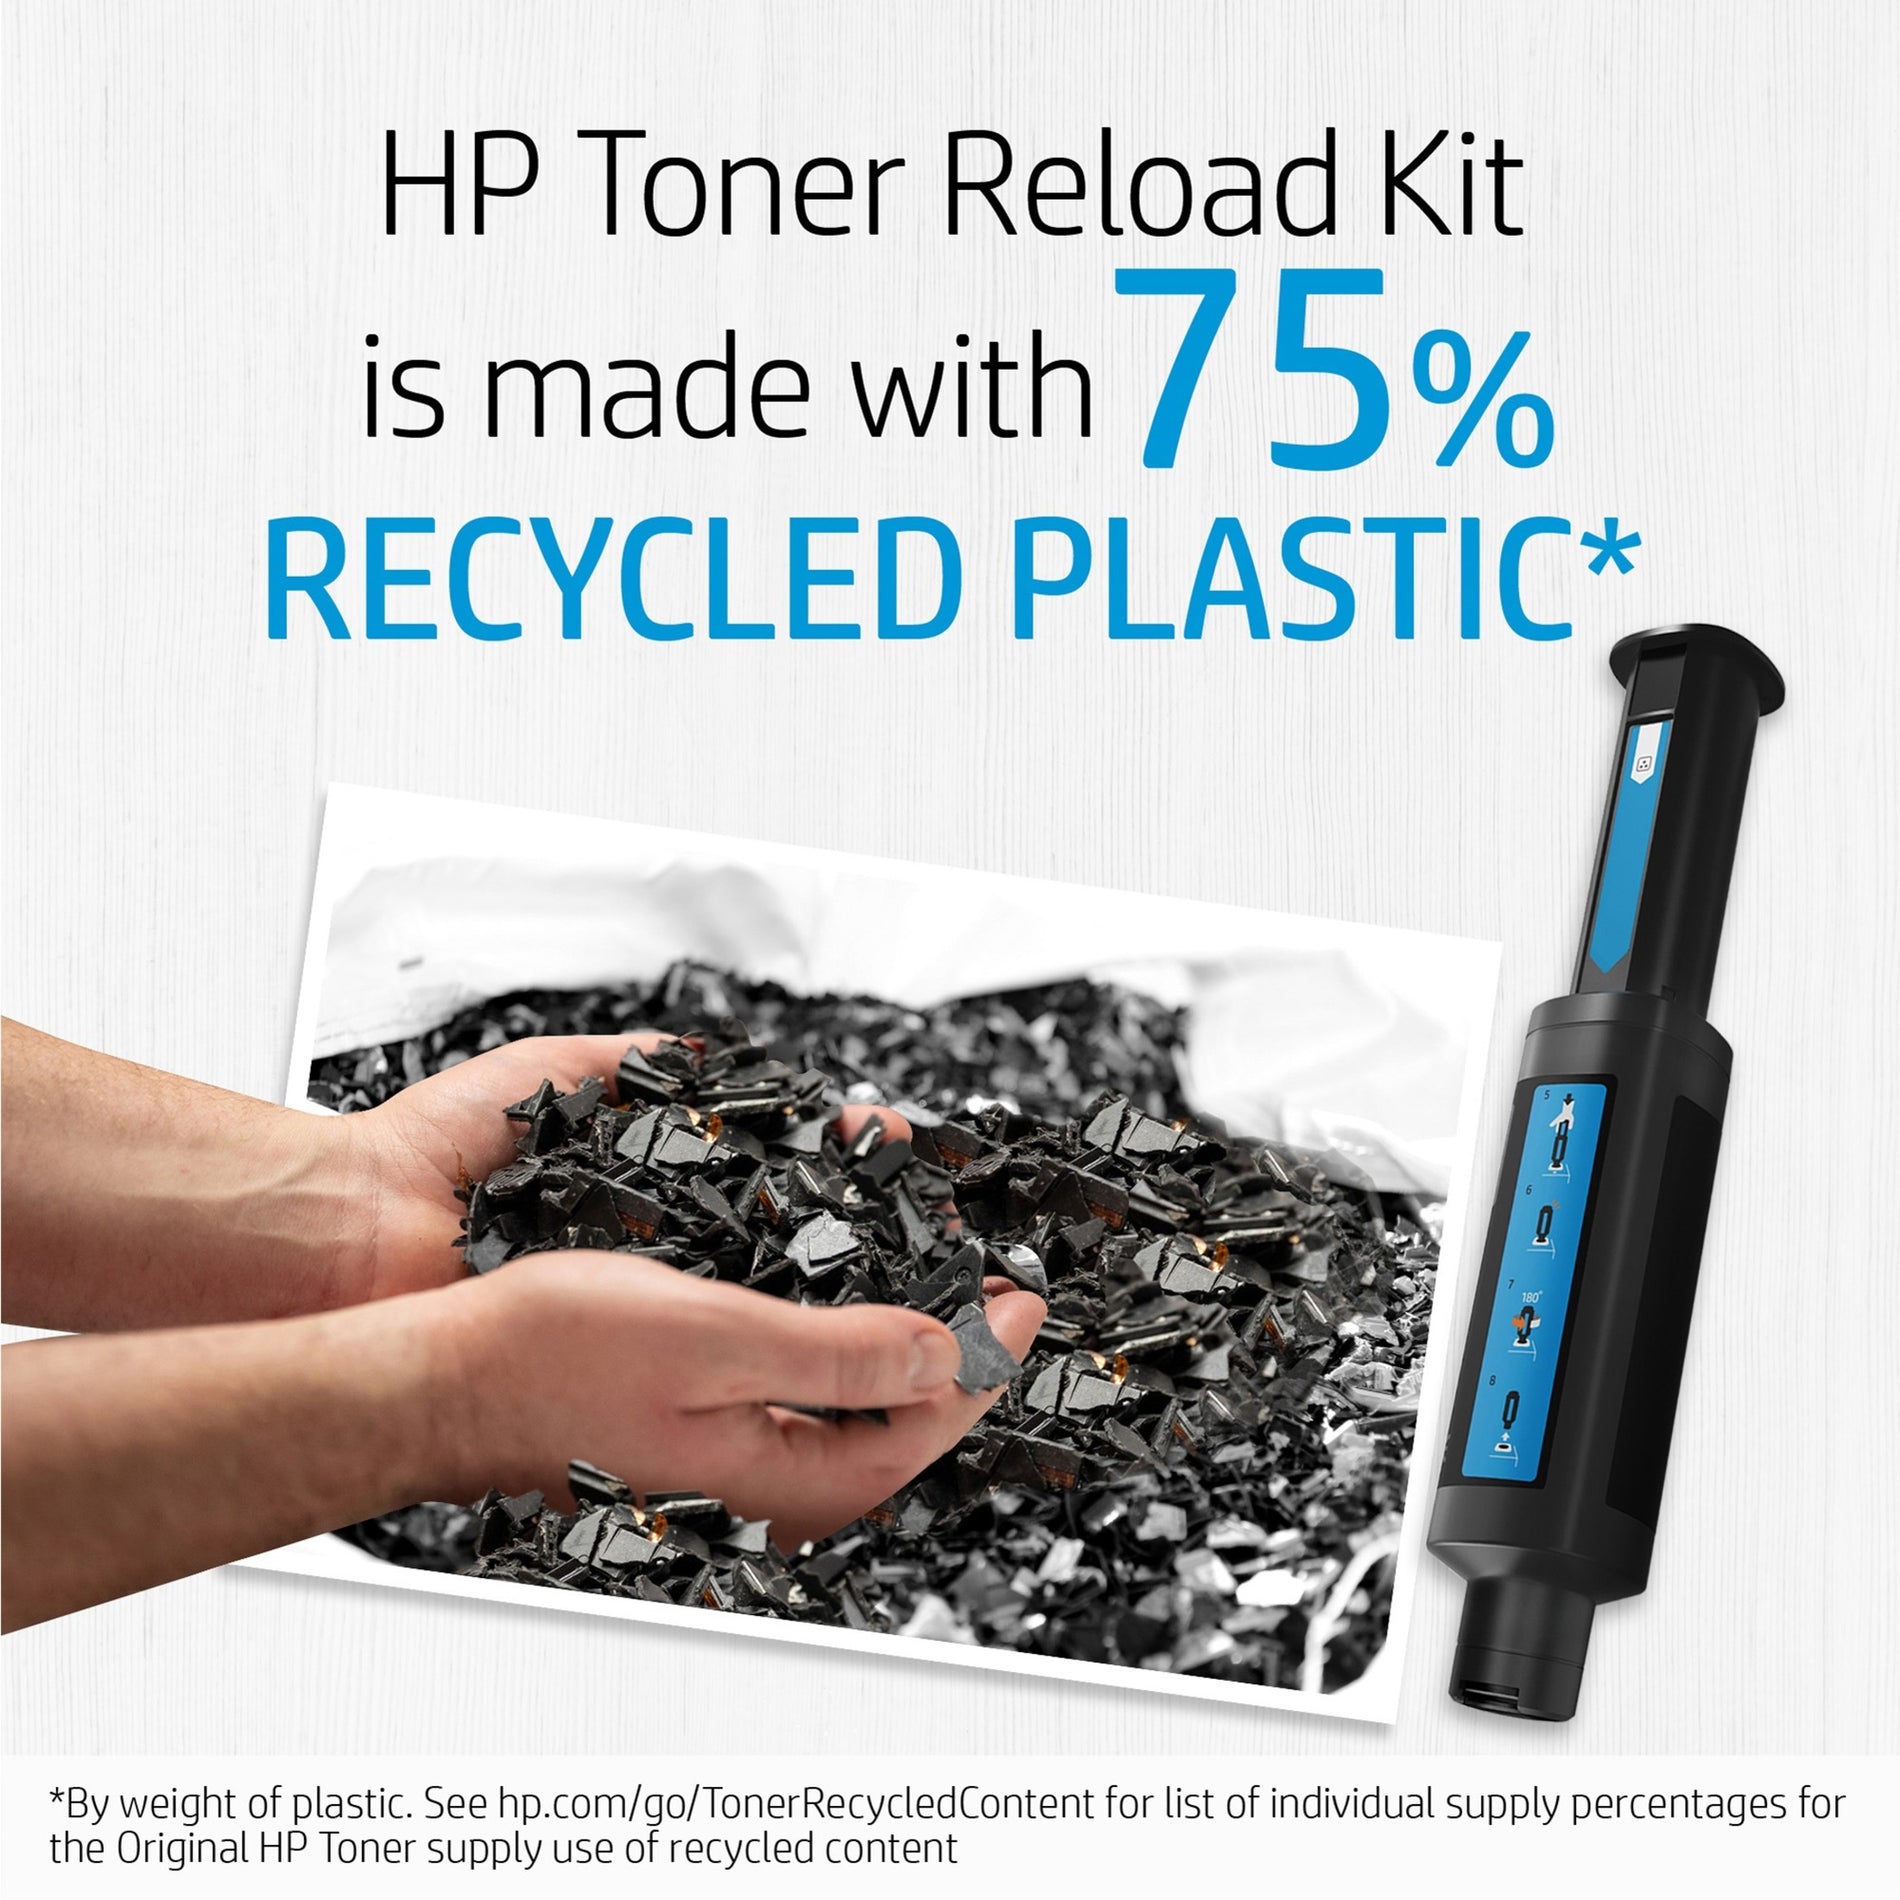 HP CE250A 504A Toner Cartridge, 5000 Page Yield, Black